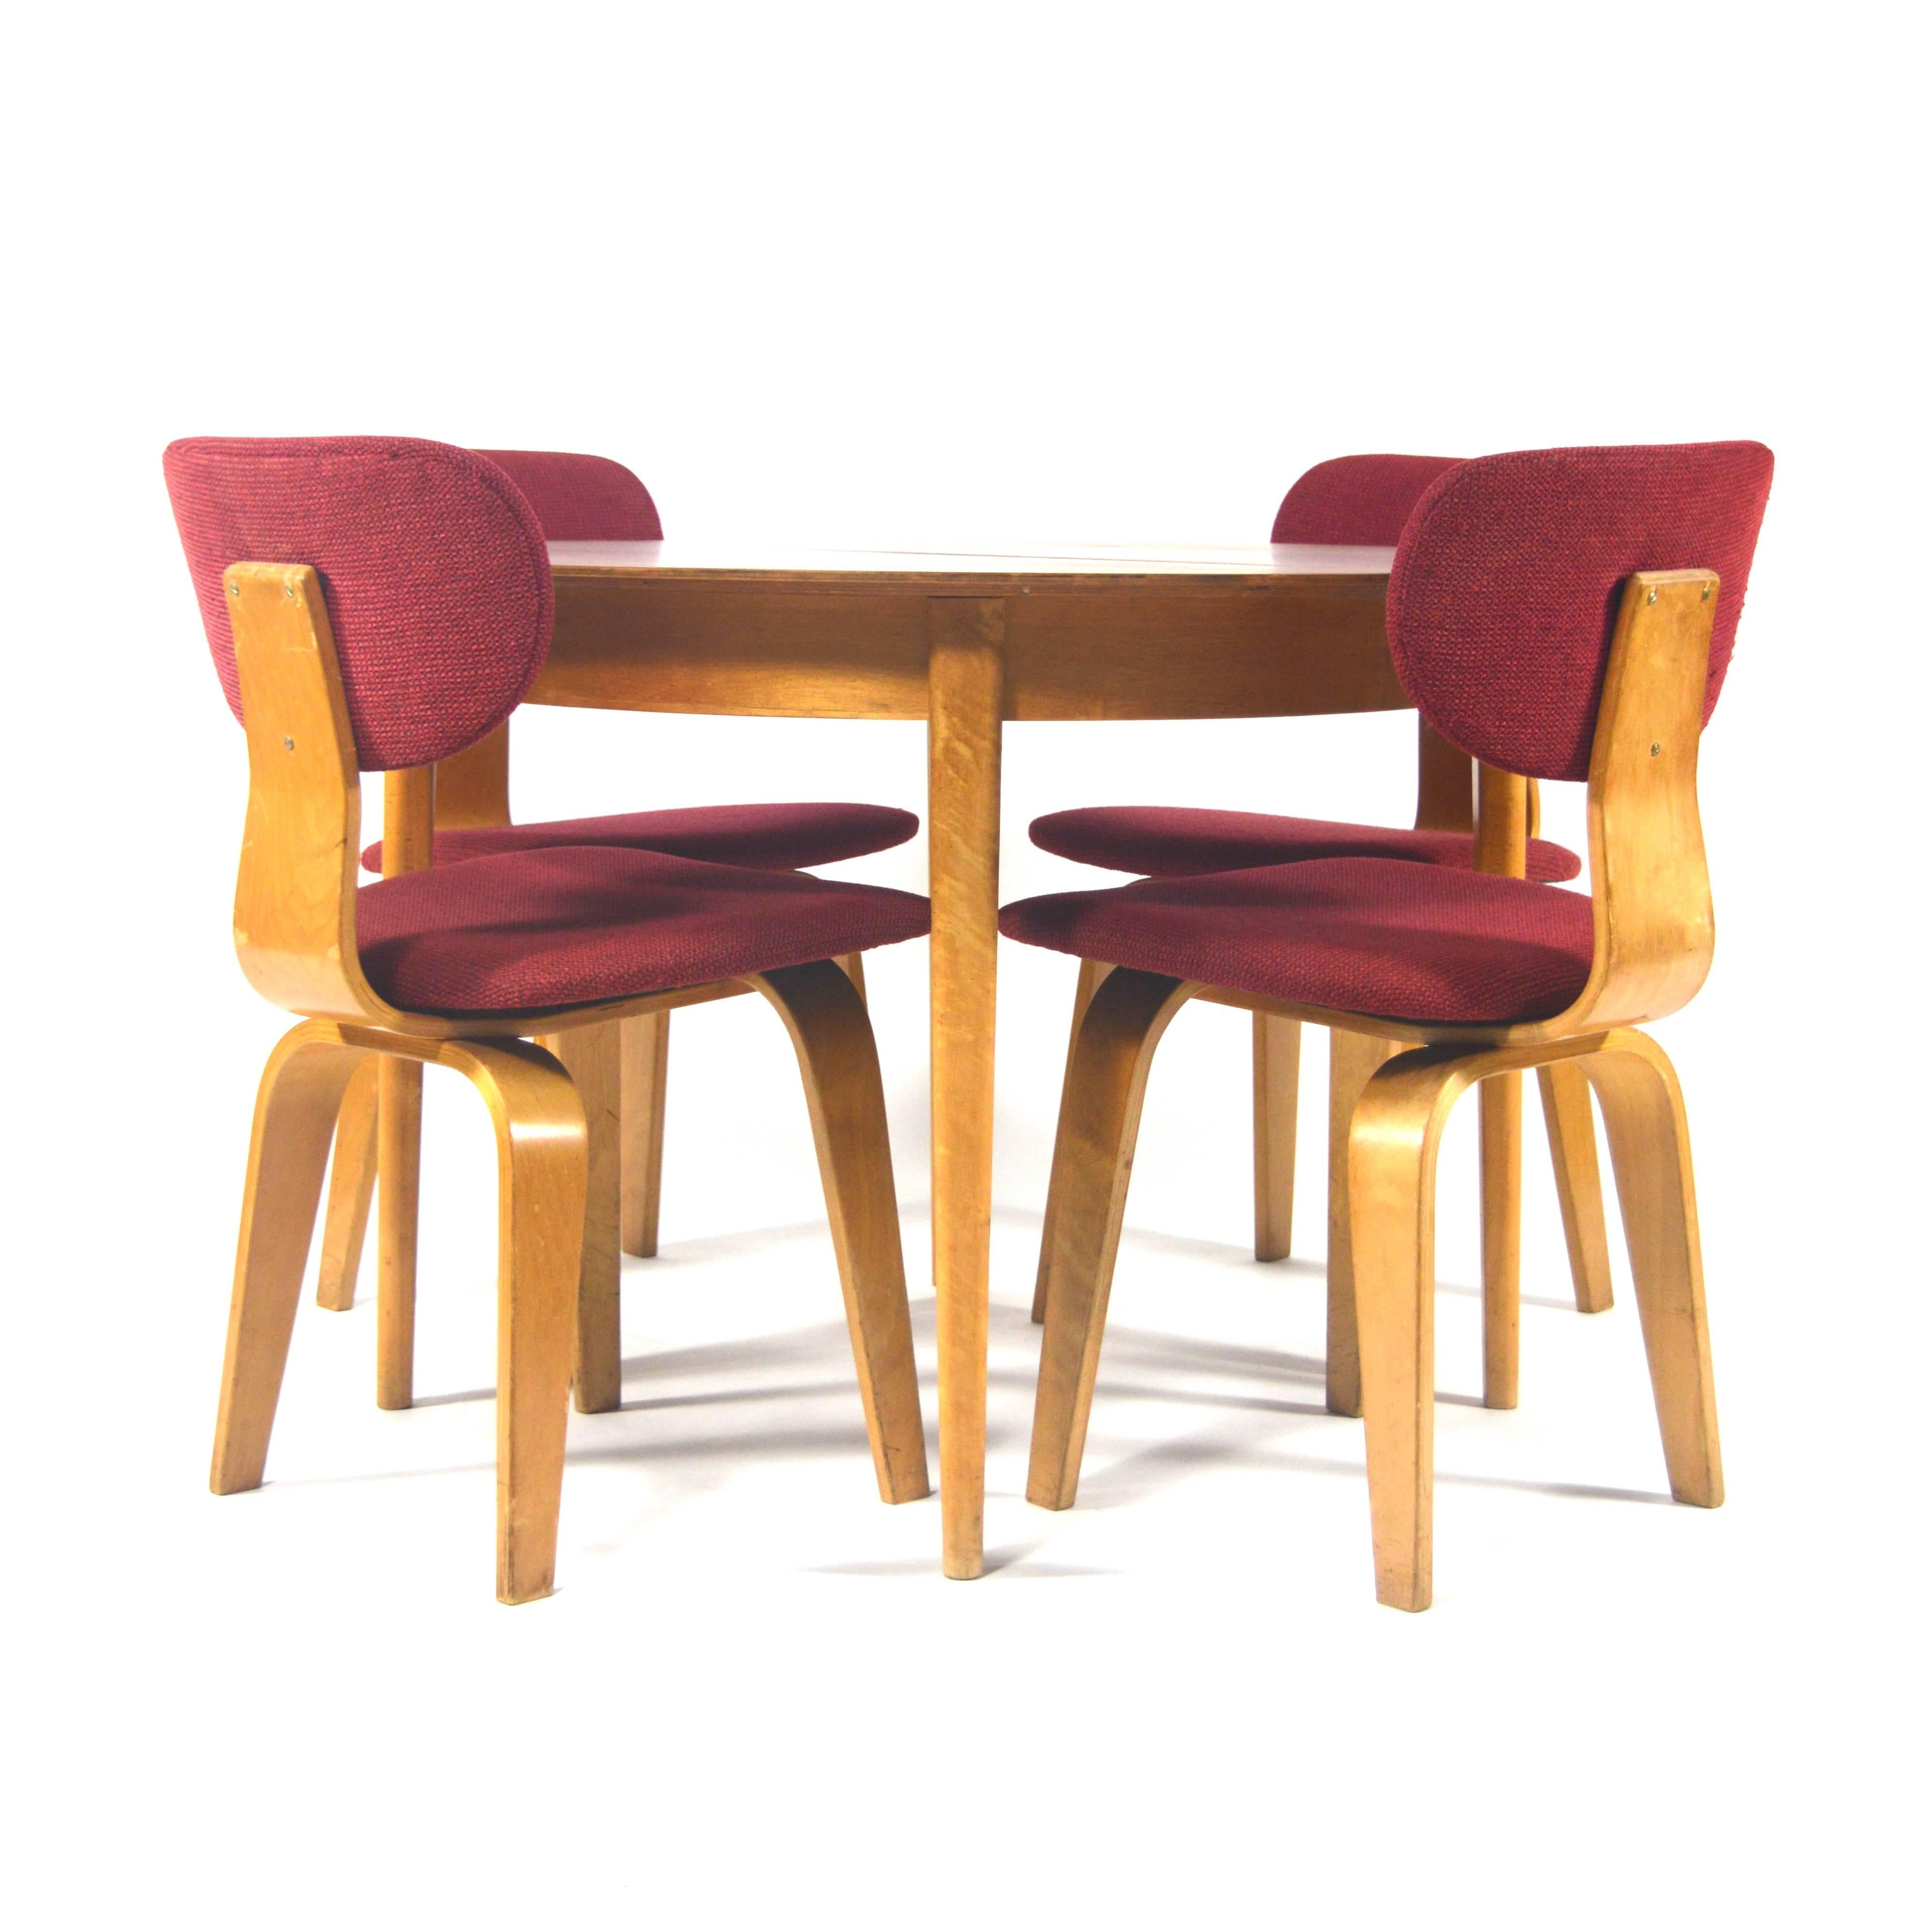 Mid-20th Century Cees Braakman for Pastoe Birch Plywood and Teak Dining Set, Netherlands, 1950s